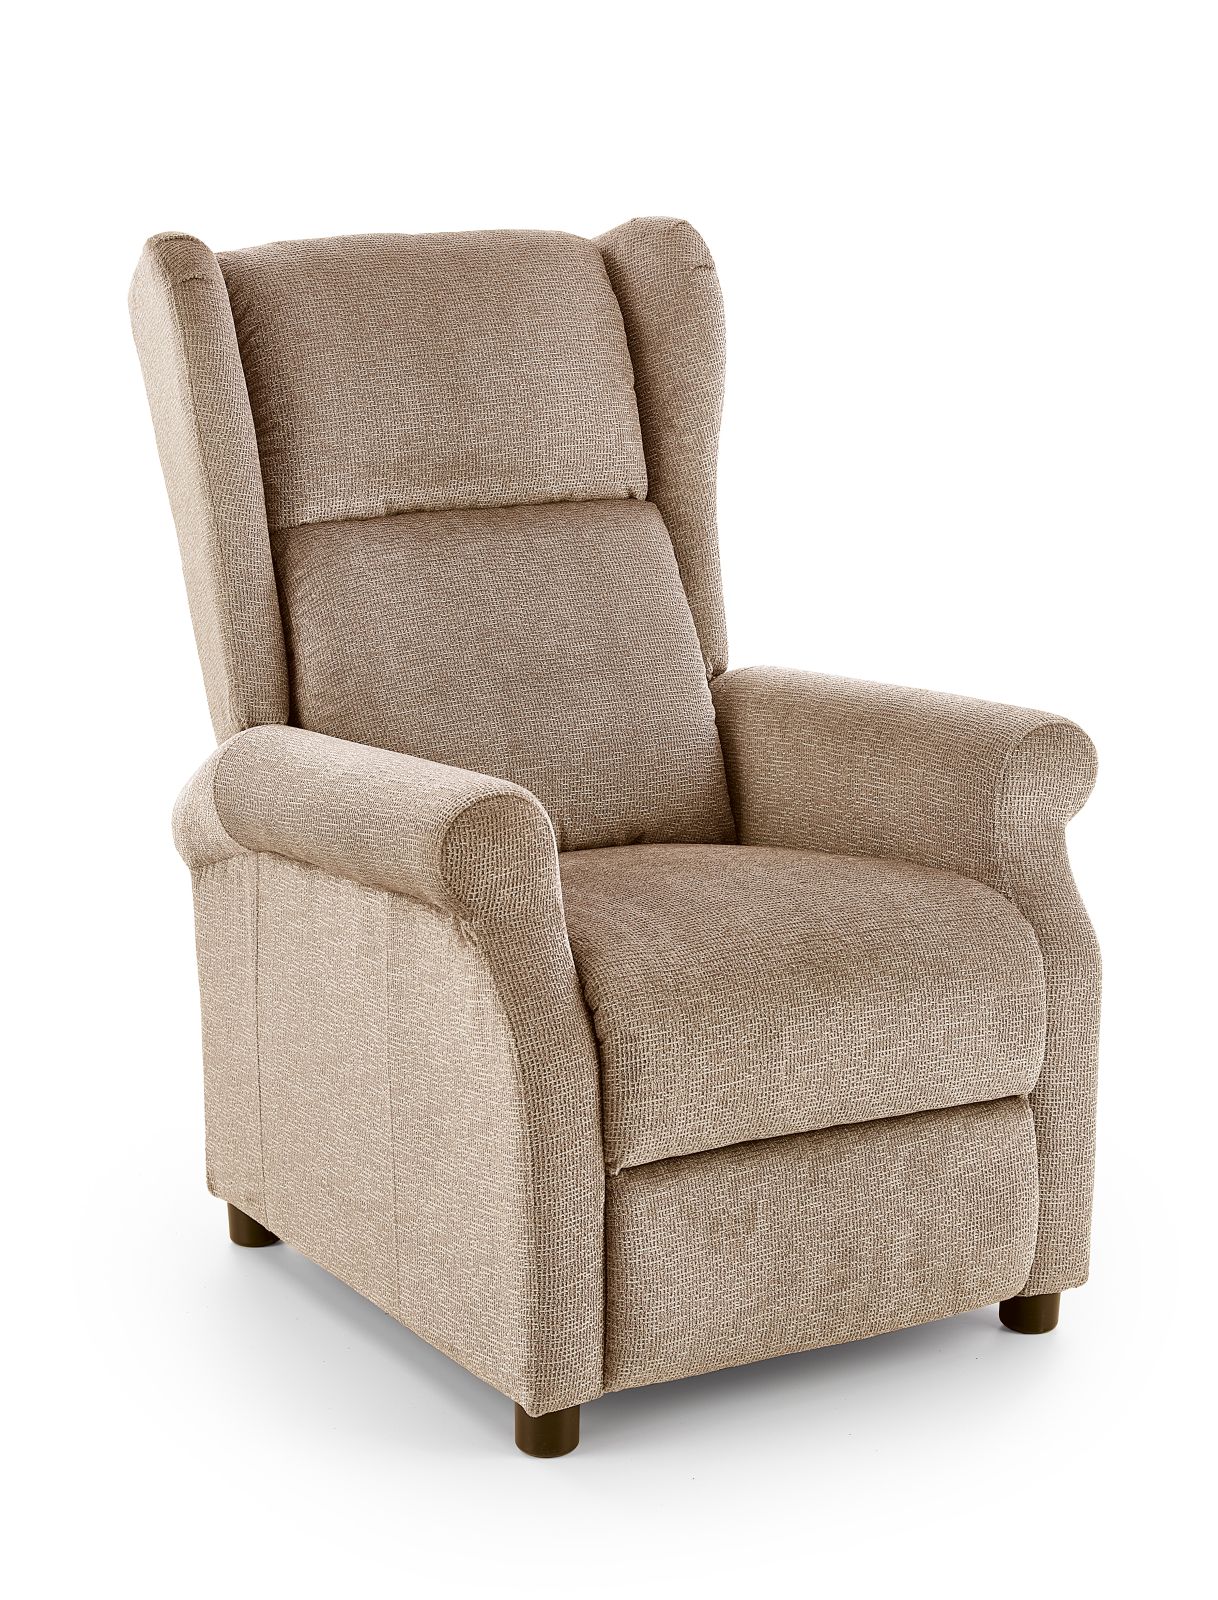 AGUSTIN recliner with massage function